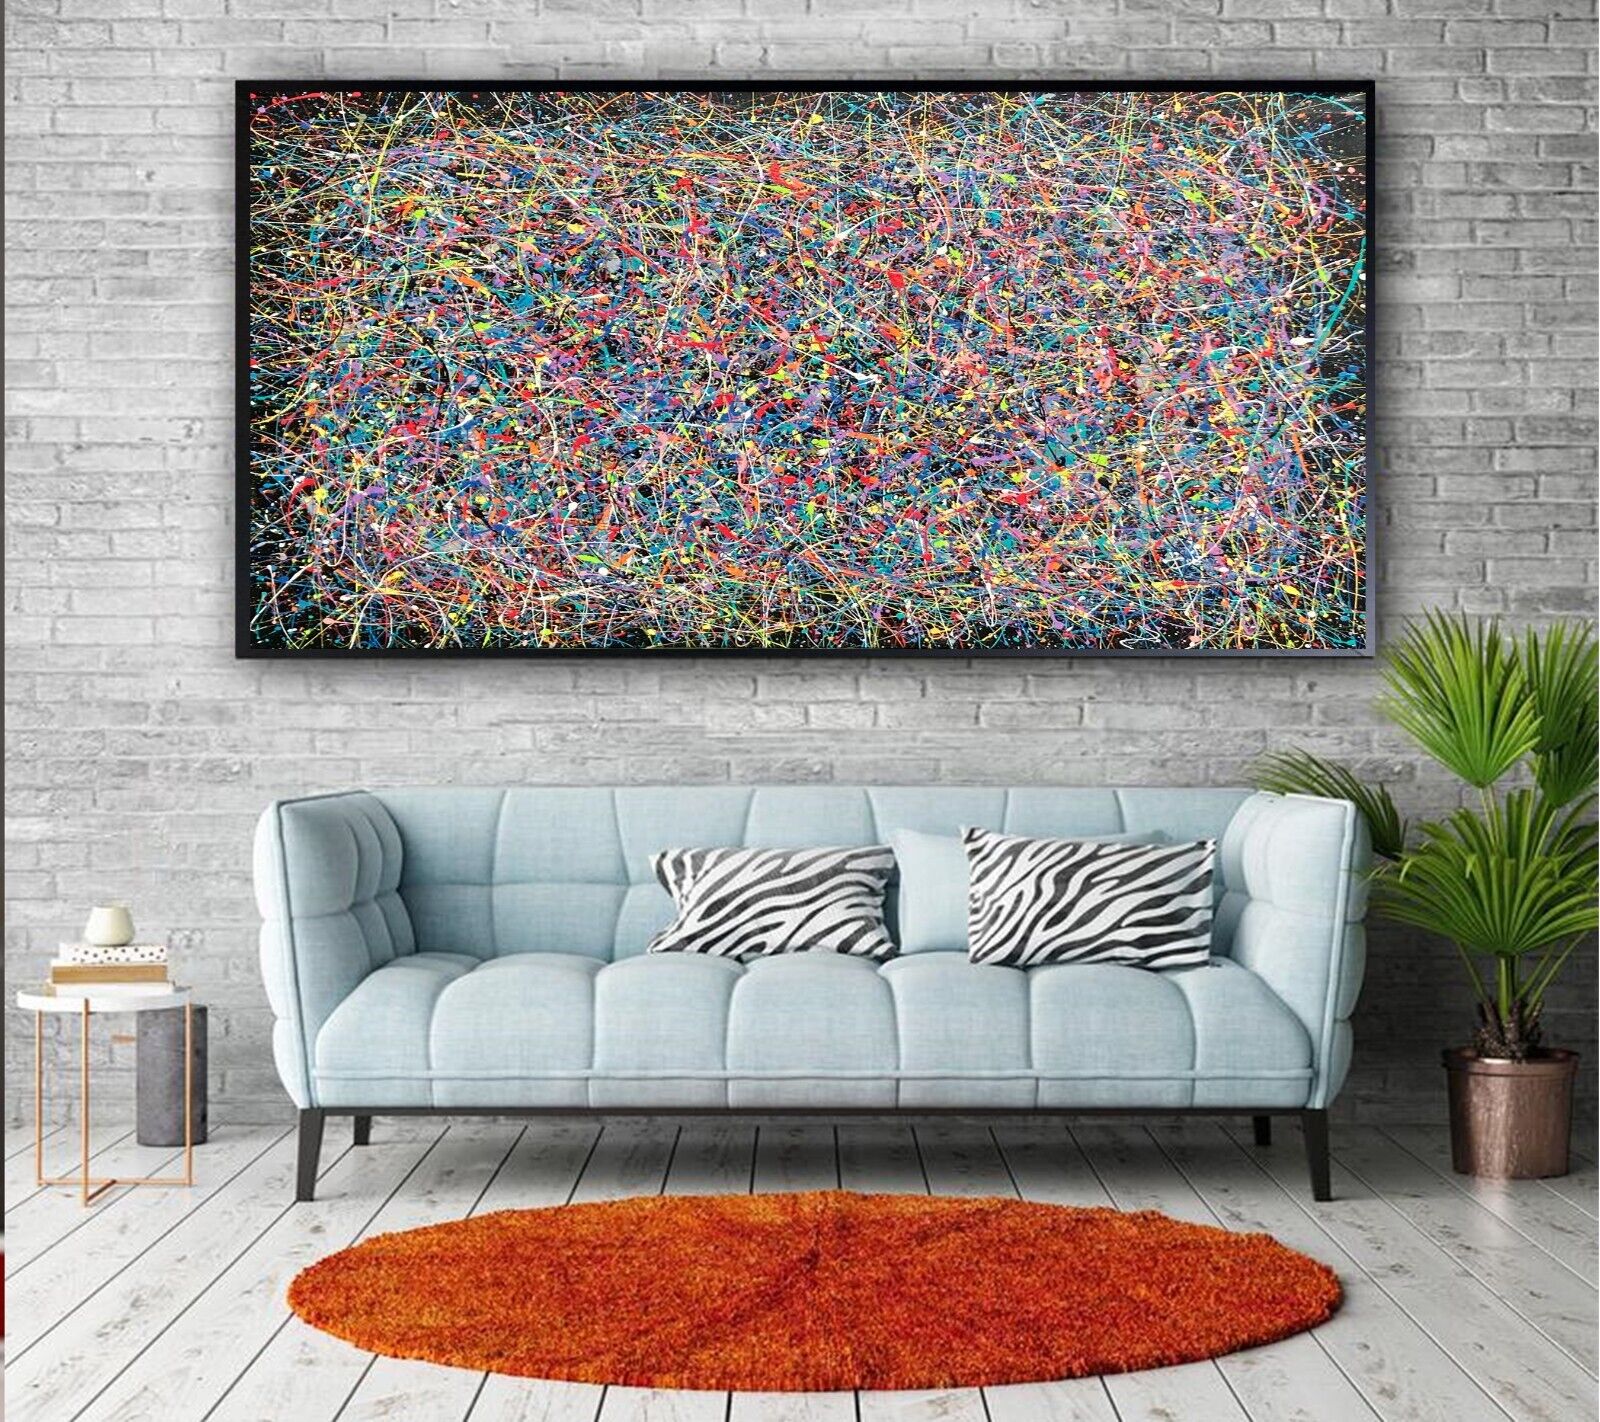 Sale Abstract Tropics 24H X 18W Framed Canvas Giclee Winford $595 Now $295